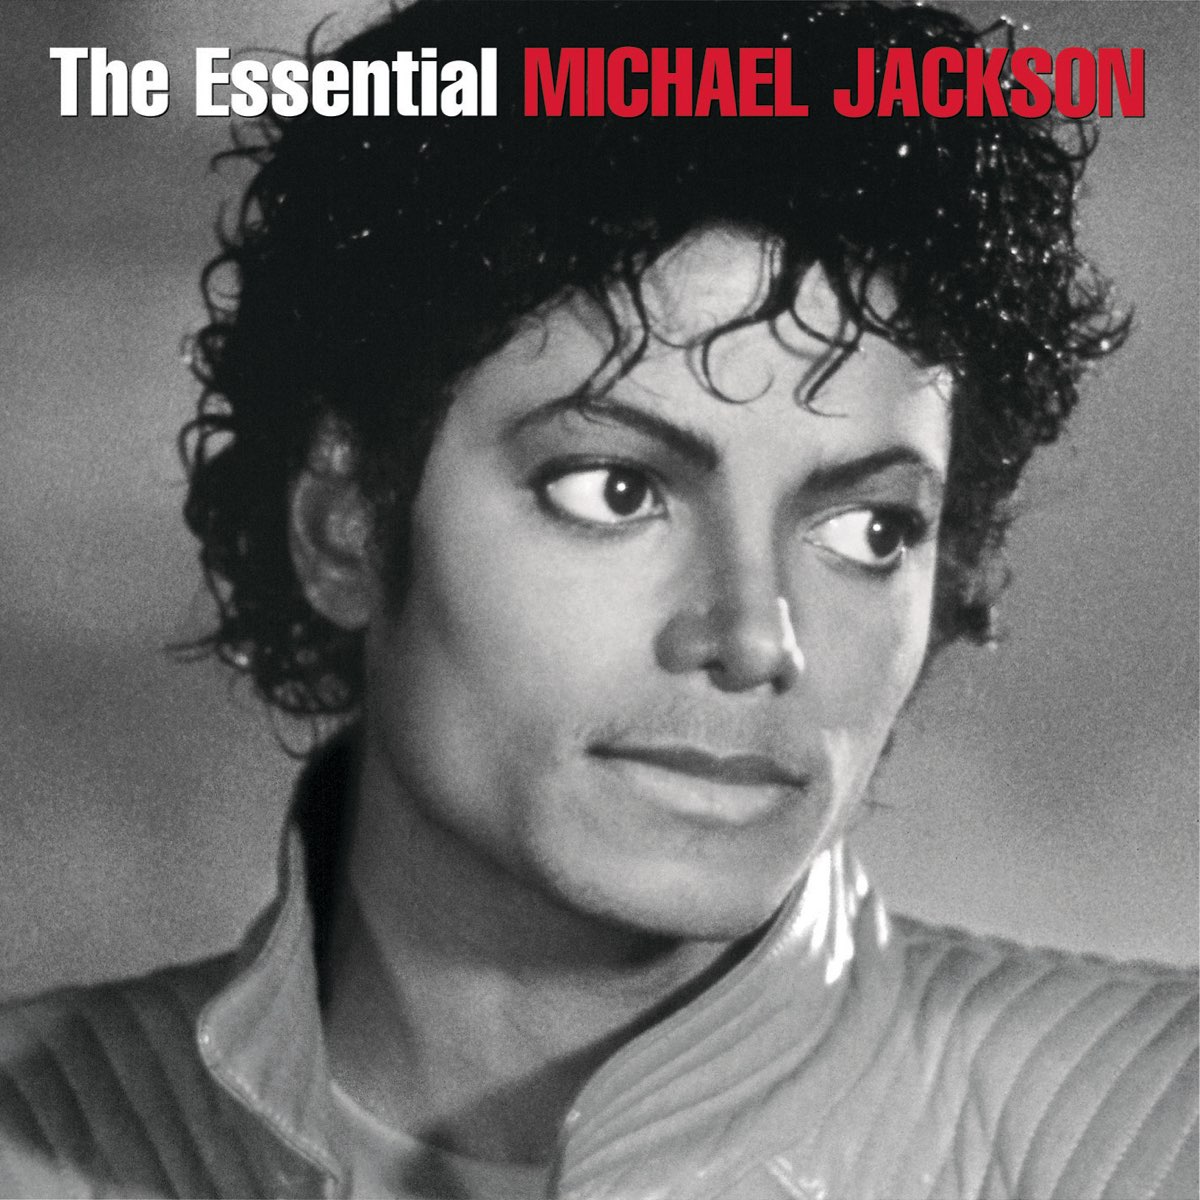 'The Essential Michael Jackson' album has reached its 150th week run in the U.K albums chart. This is the fifth Michael Jackson album to reach this milestone. With this Jackson is now tallied with Taylor Swift, who has most albums over 150 weeks in the U.K official albums chart.